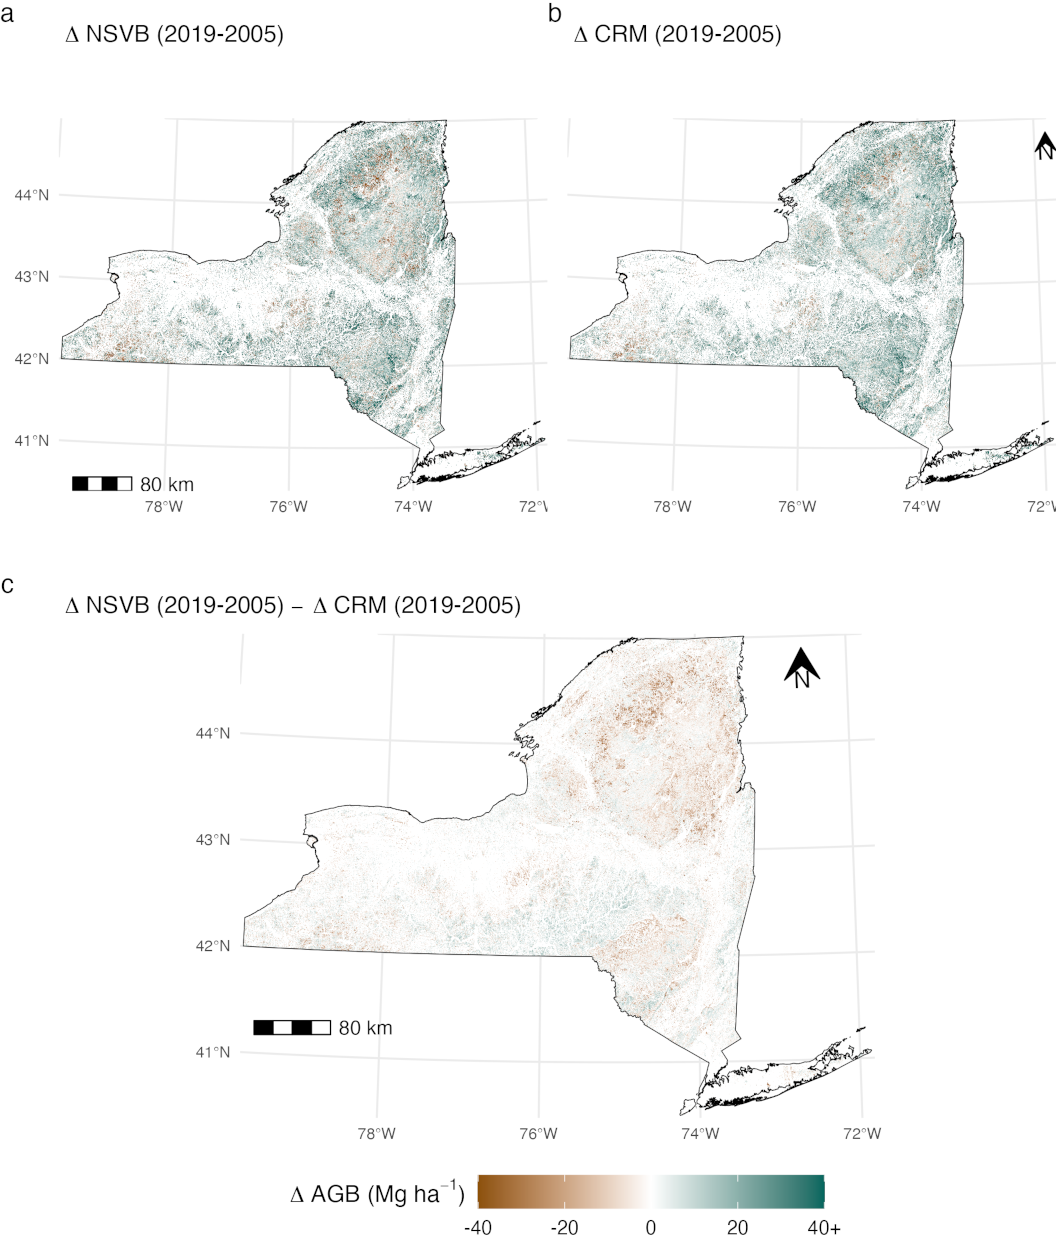 Three maps of New York State, showing estimates of carbon stock changes between 2005 and 2019 under old allometrics and new allometrics, as well as the difference between these two maps.